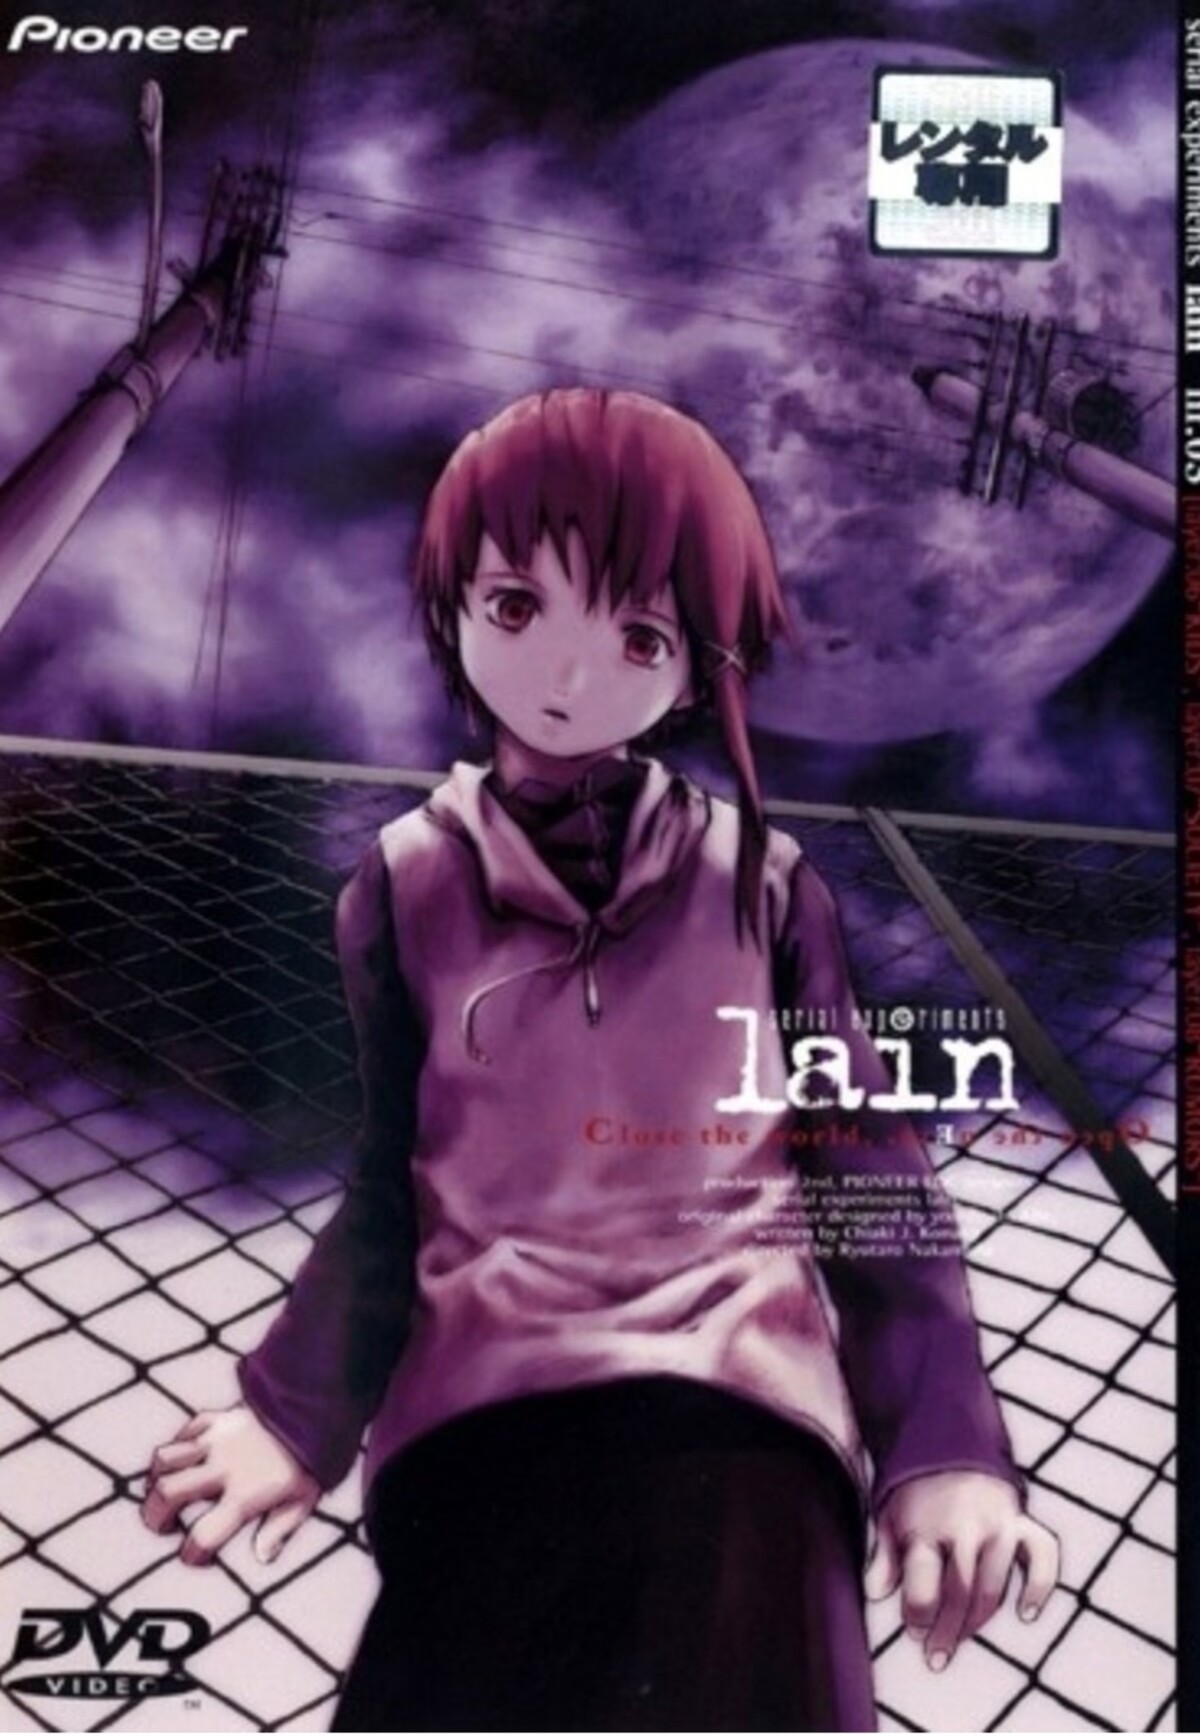 serial experiments Lain